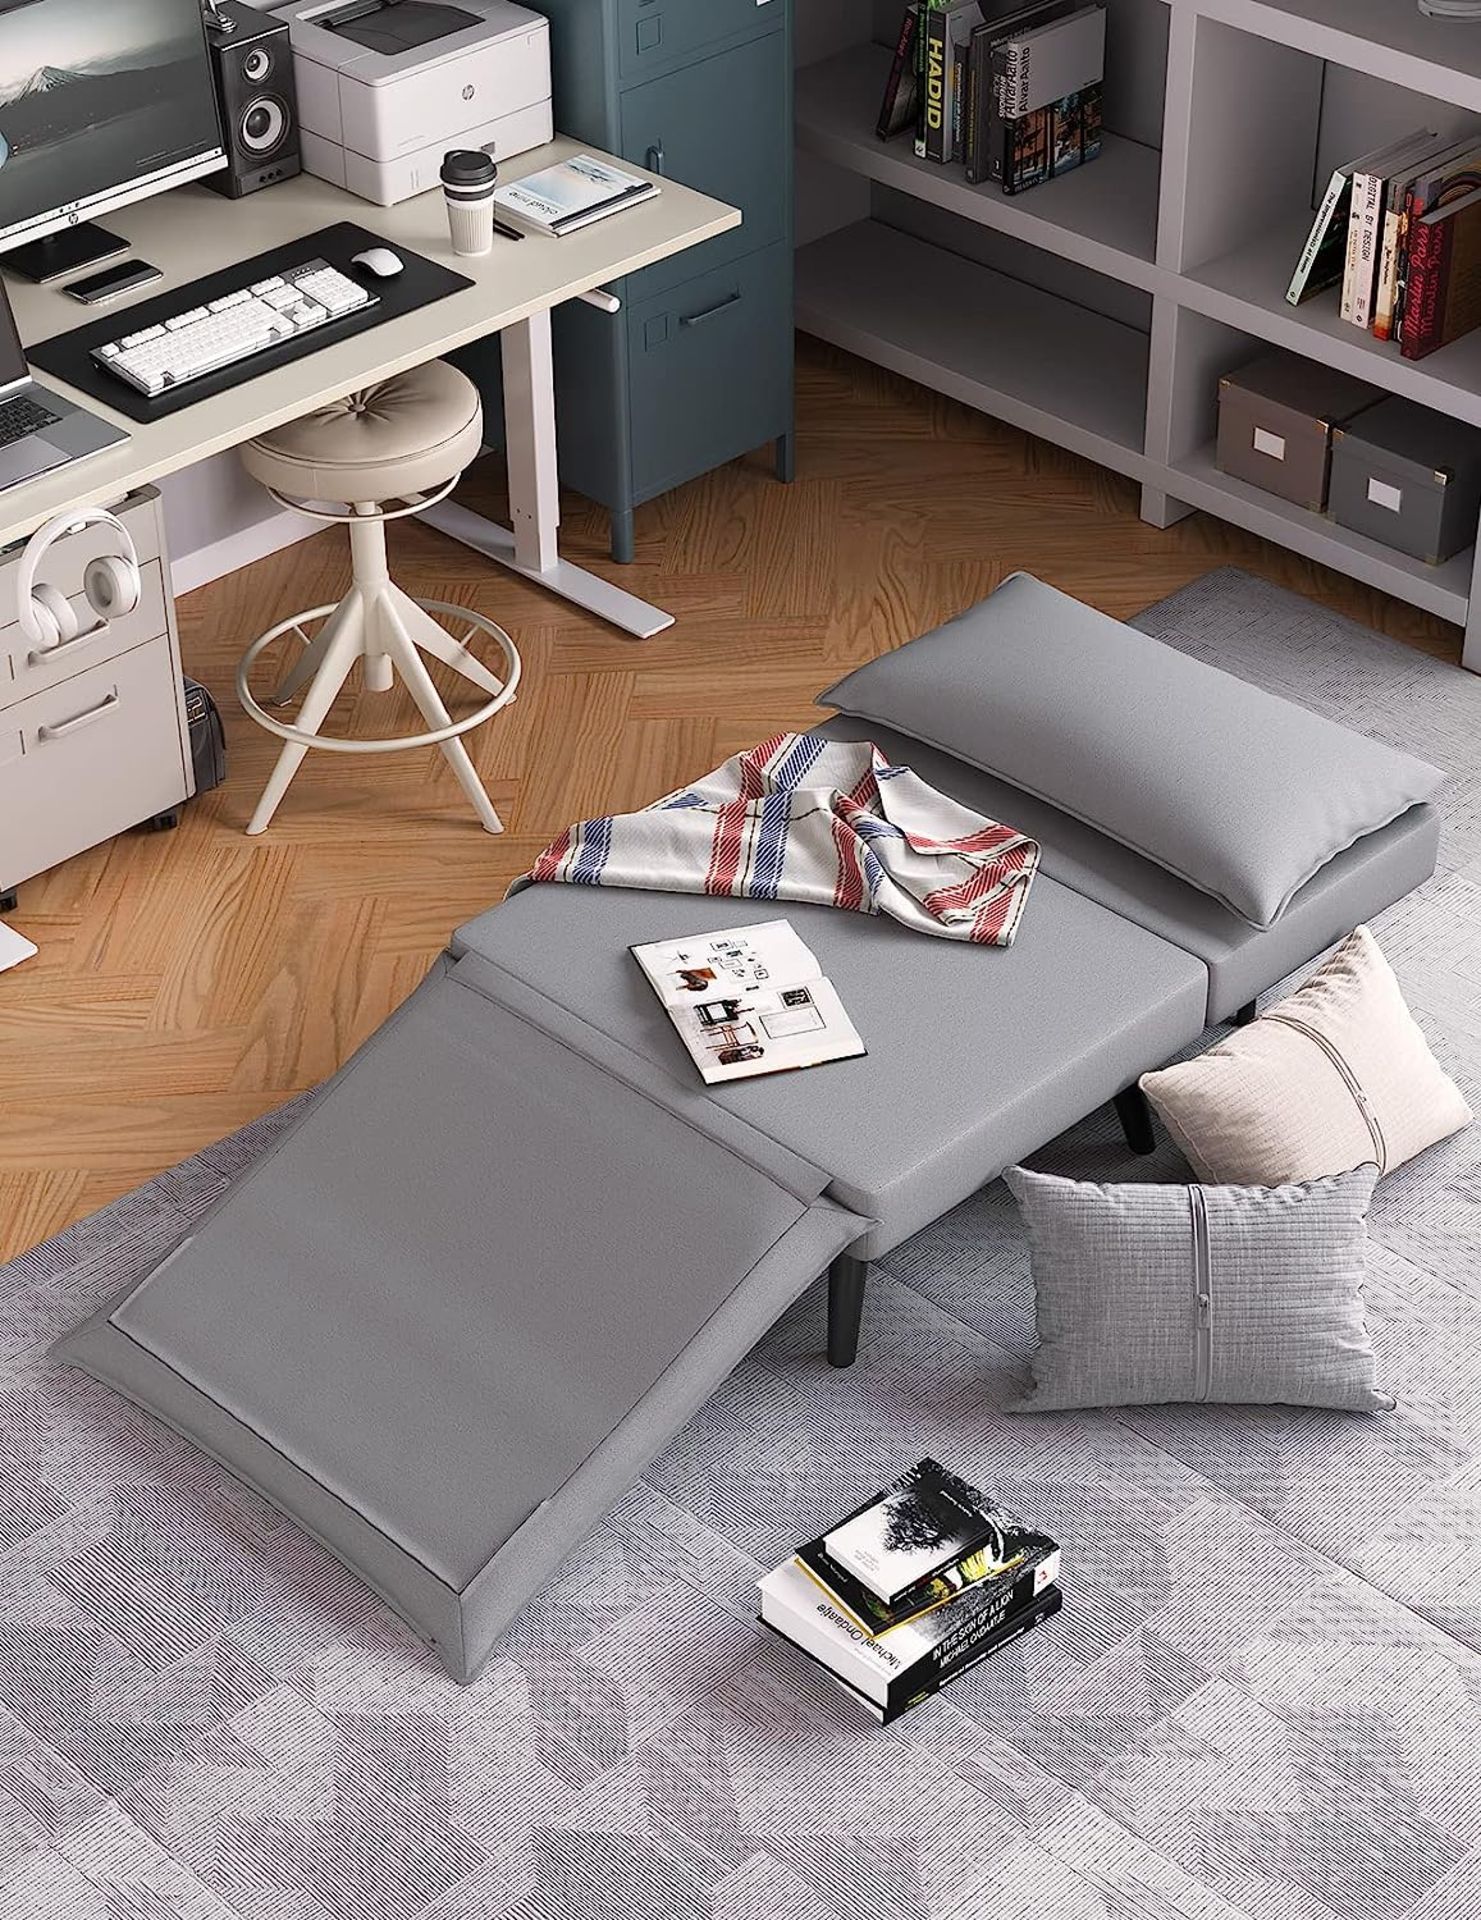 RRP £129.99 Vesgantti 6-in-1 Sofa Bed Chair, Convertible Adjustable Folding 5 Position Sleeper Chair - Image 4 of 5